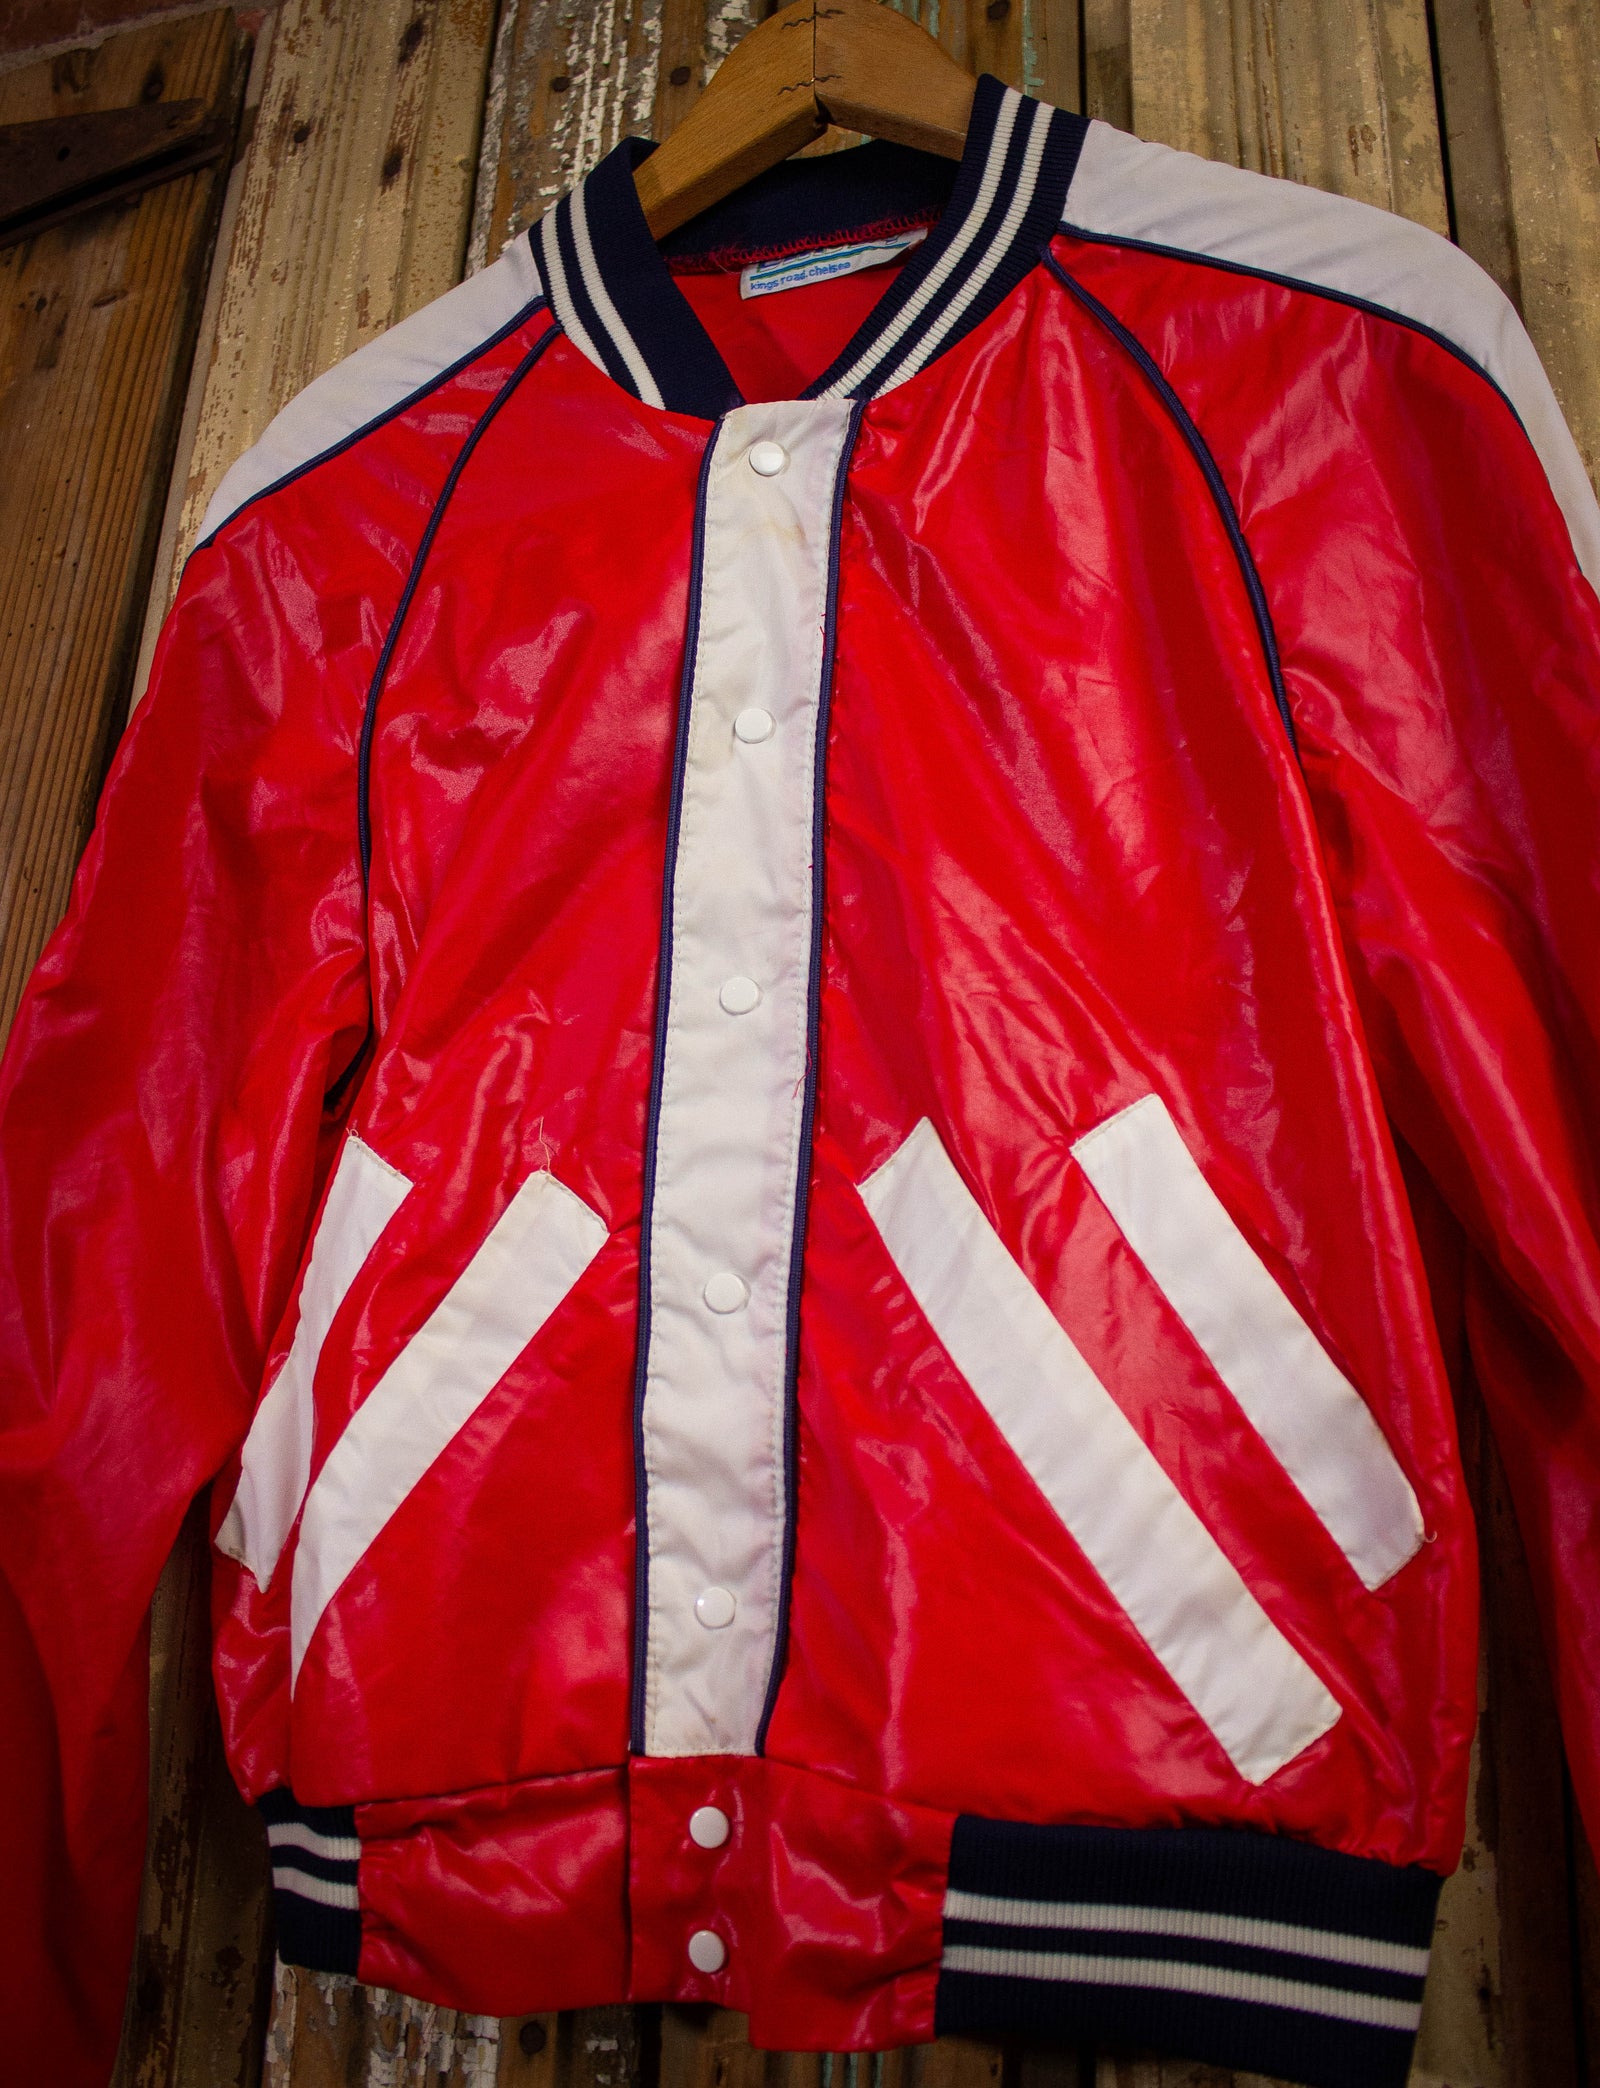 Vintage Dandy Windbreaker Bomber Jacket Red White and Black Small